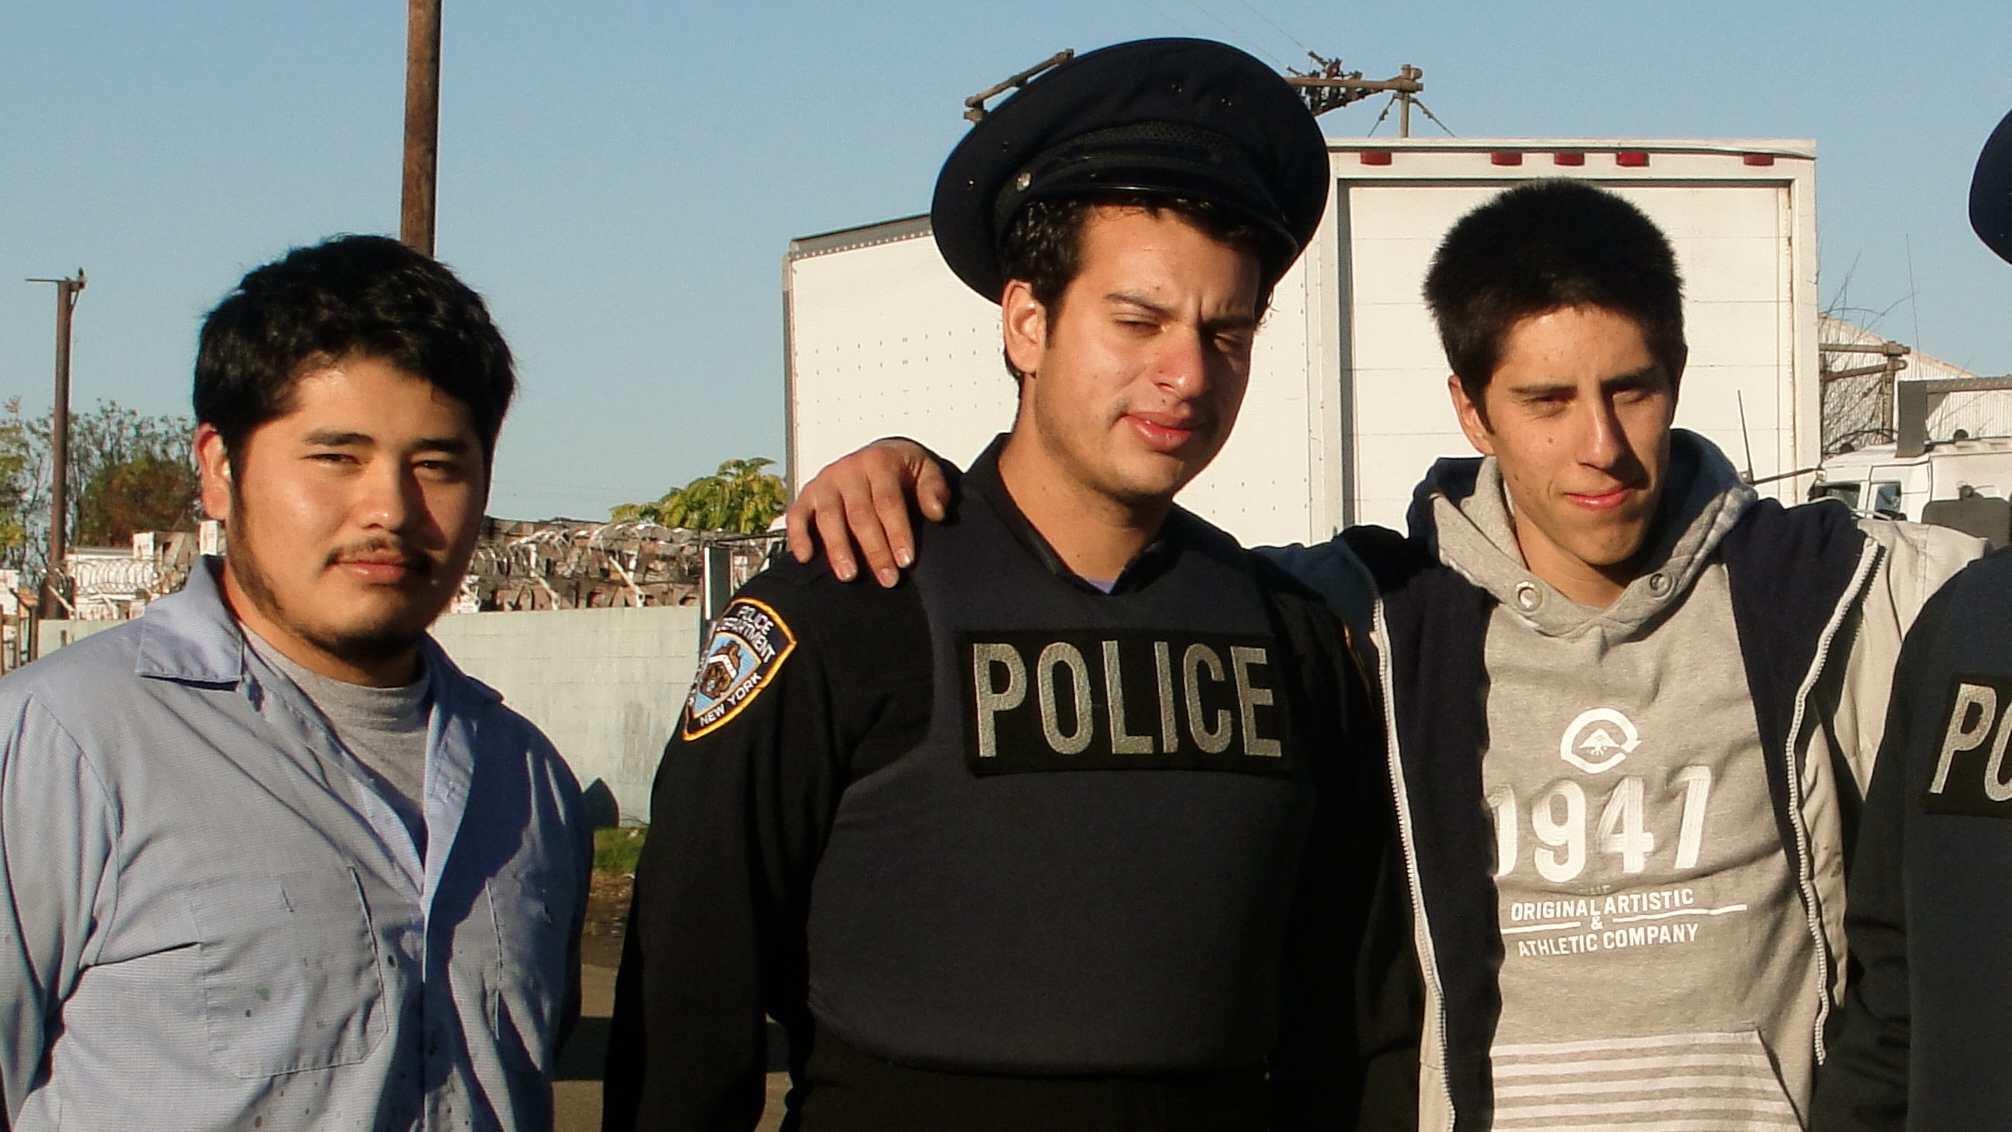 Writer/Director Addison Sandoval with actors Doroteo Equihua Jr. and Marvin Pena filming on location in Compton, CA.